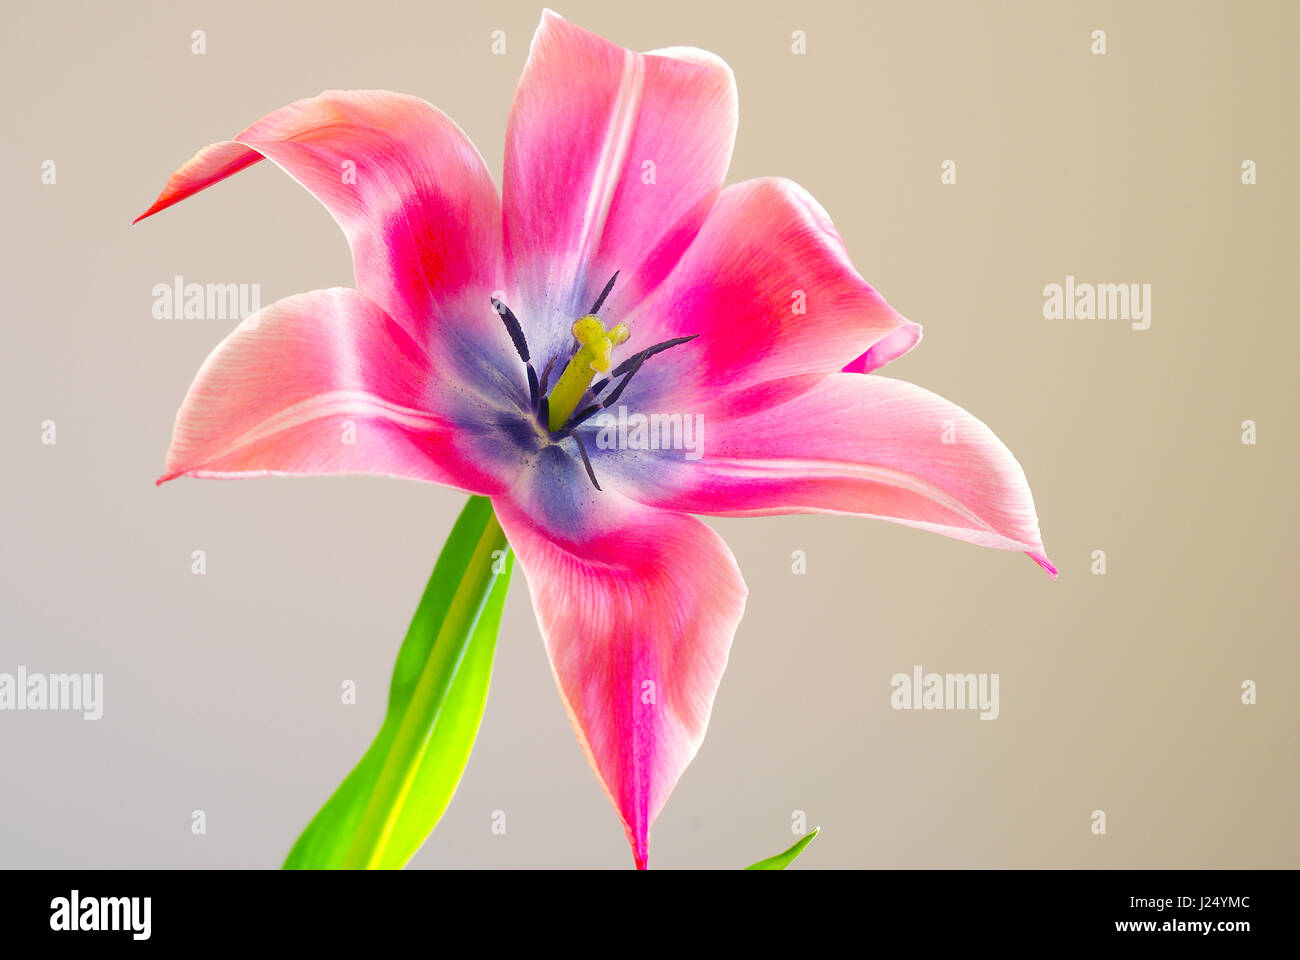 Tulip flower spring bloomong view. Natural beauty flowery. Blossoming pink petals close-up. Stock Photo